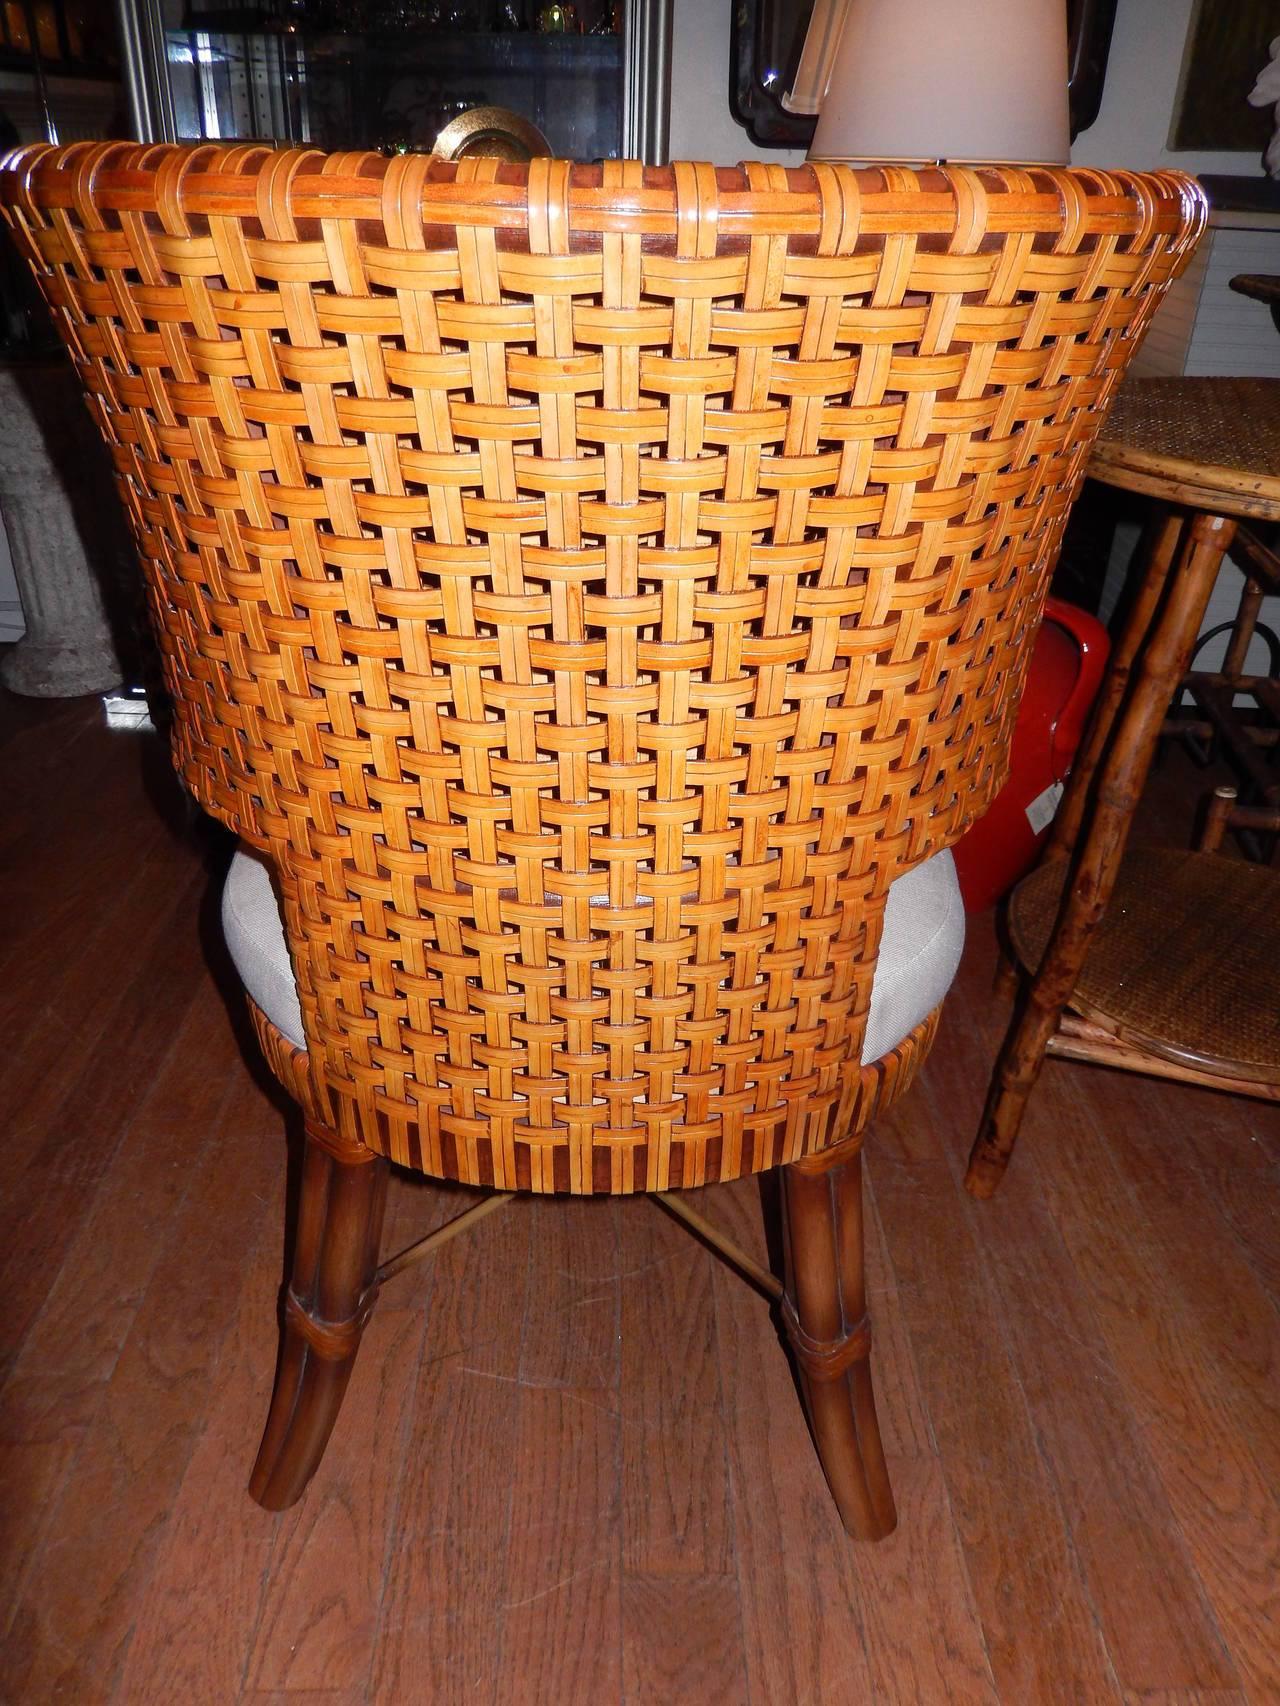 Pair of Danish modern handwoven leather chairs or dining room.
Cross bar bottom, curved back, linen upholstered seats.
Additional chairs available if required. Beautiful details, comfortable.